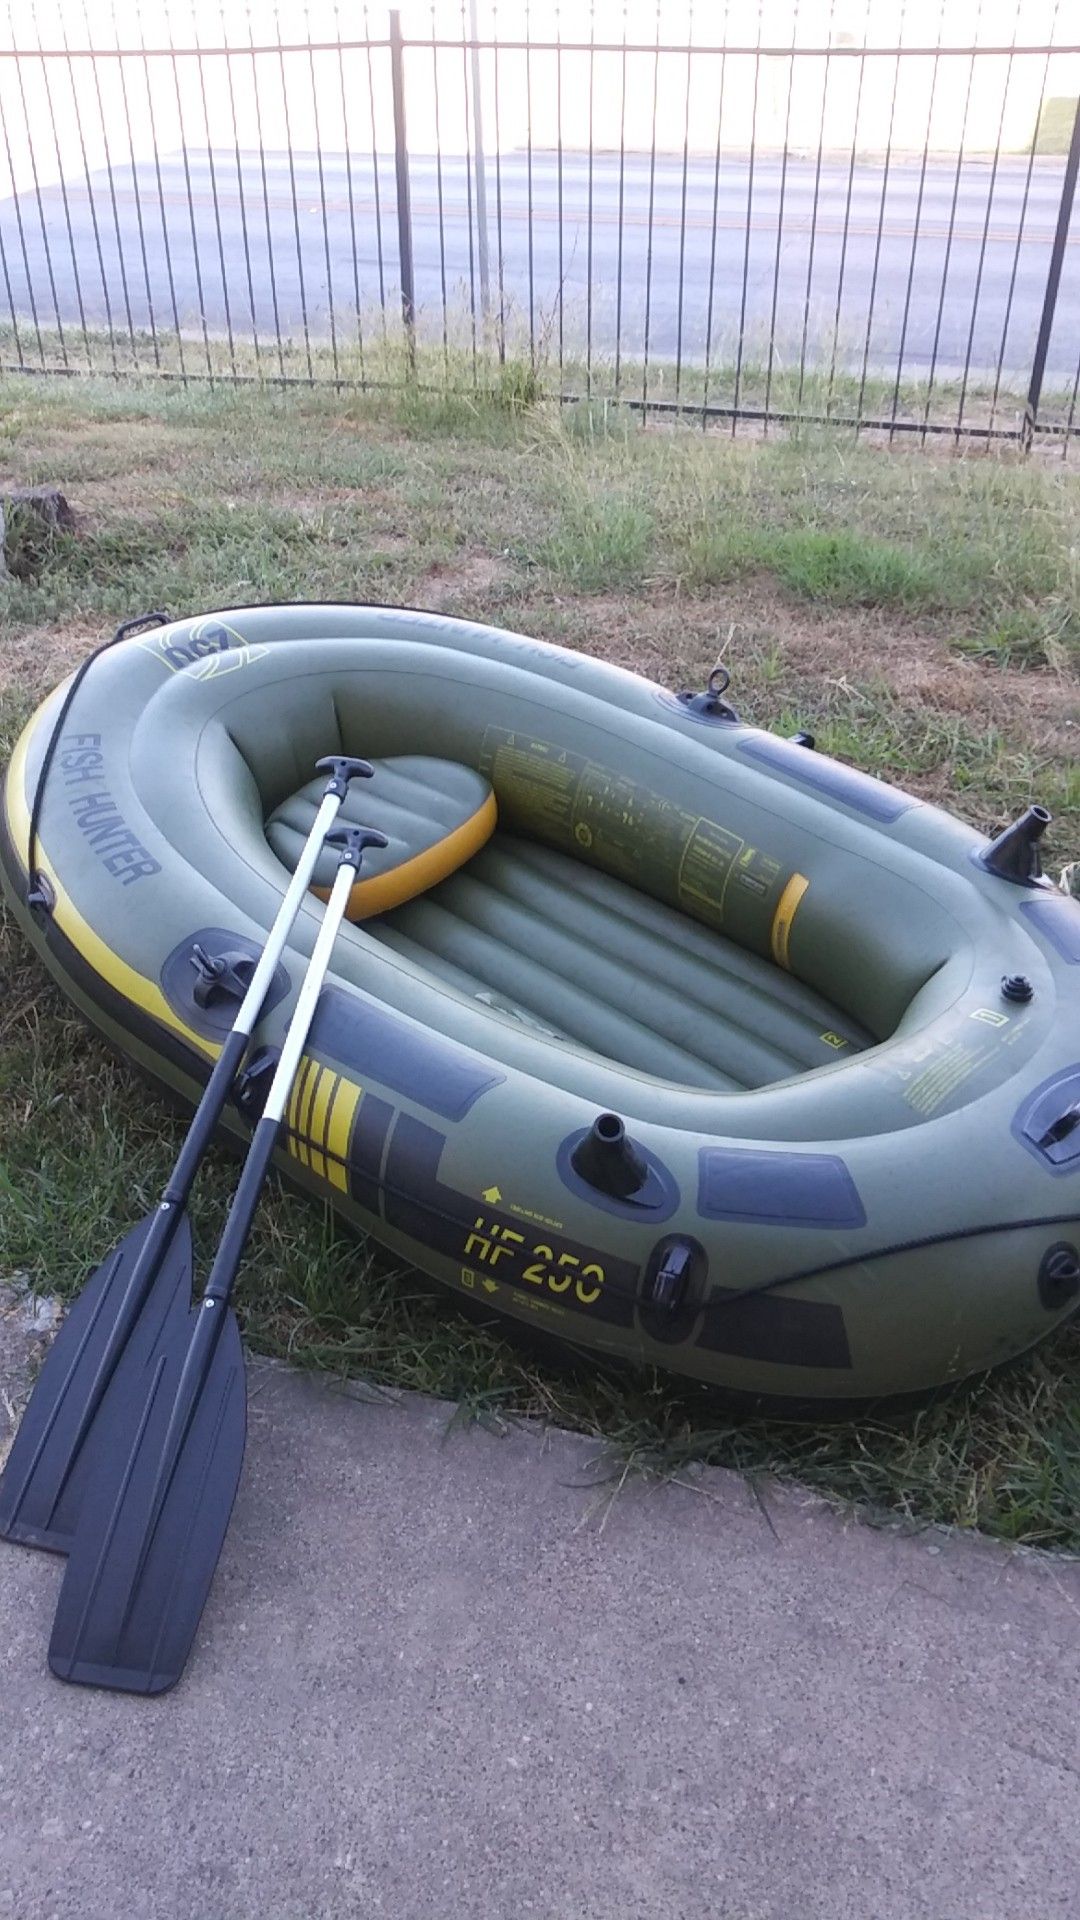 3 Man Inflatable Boat